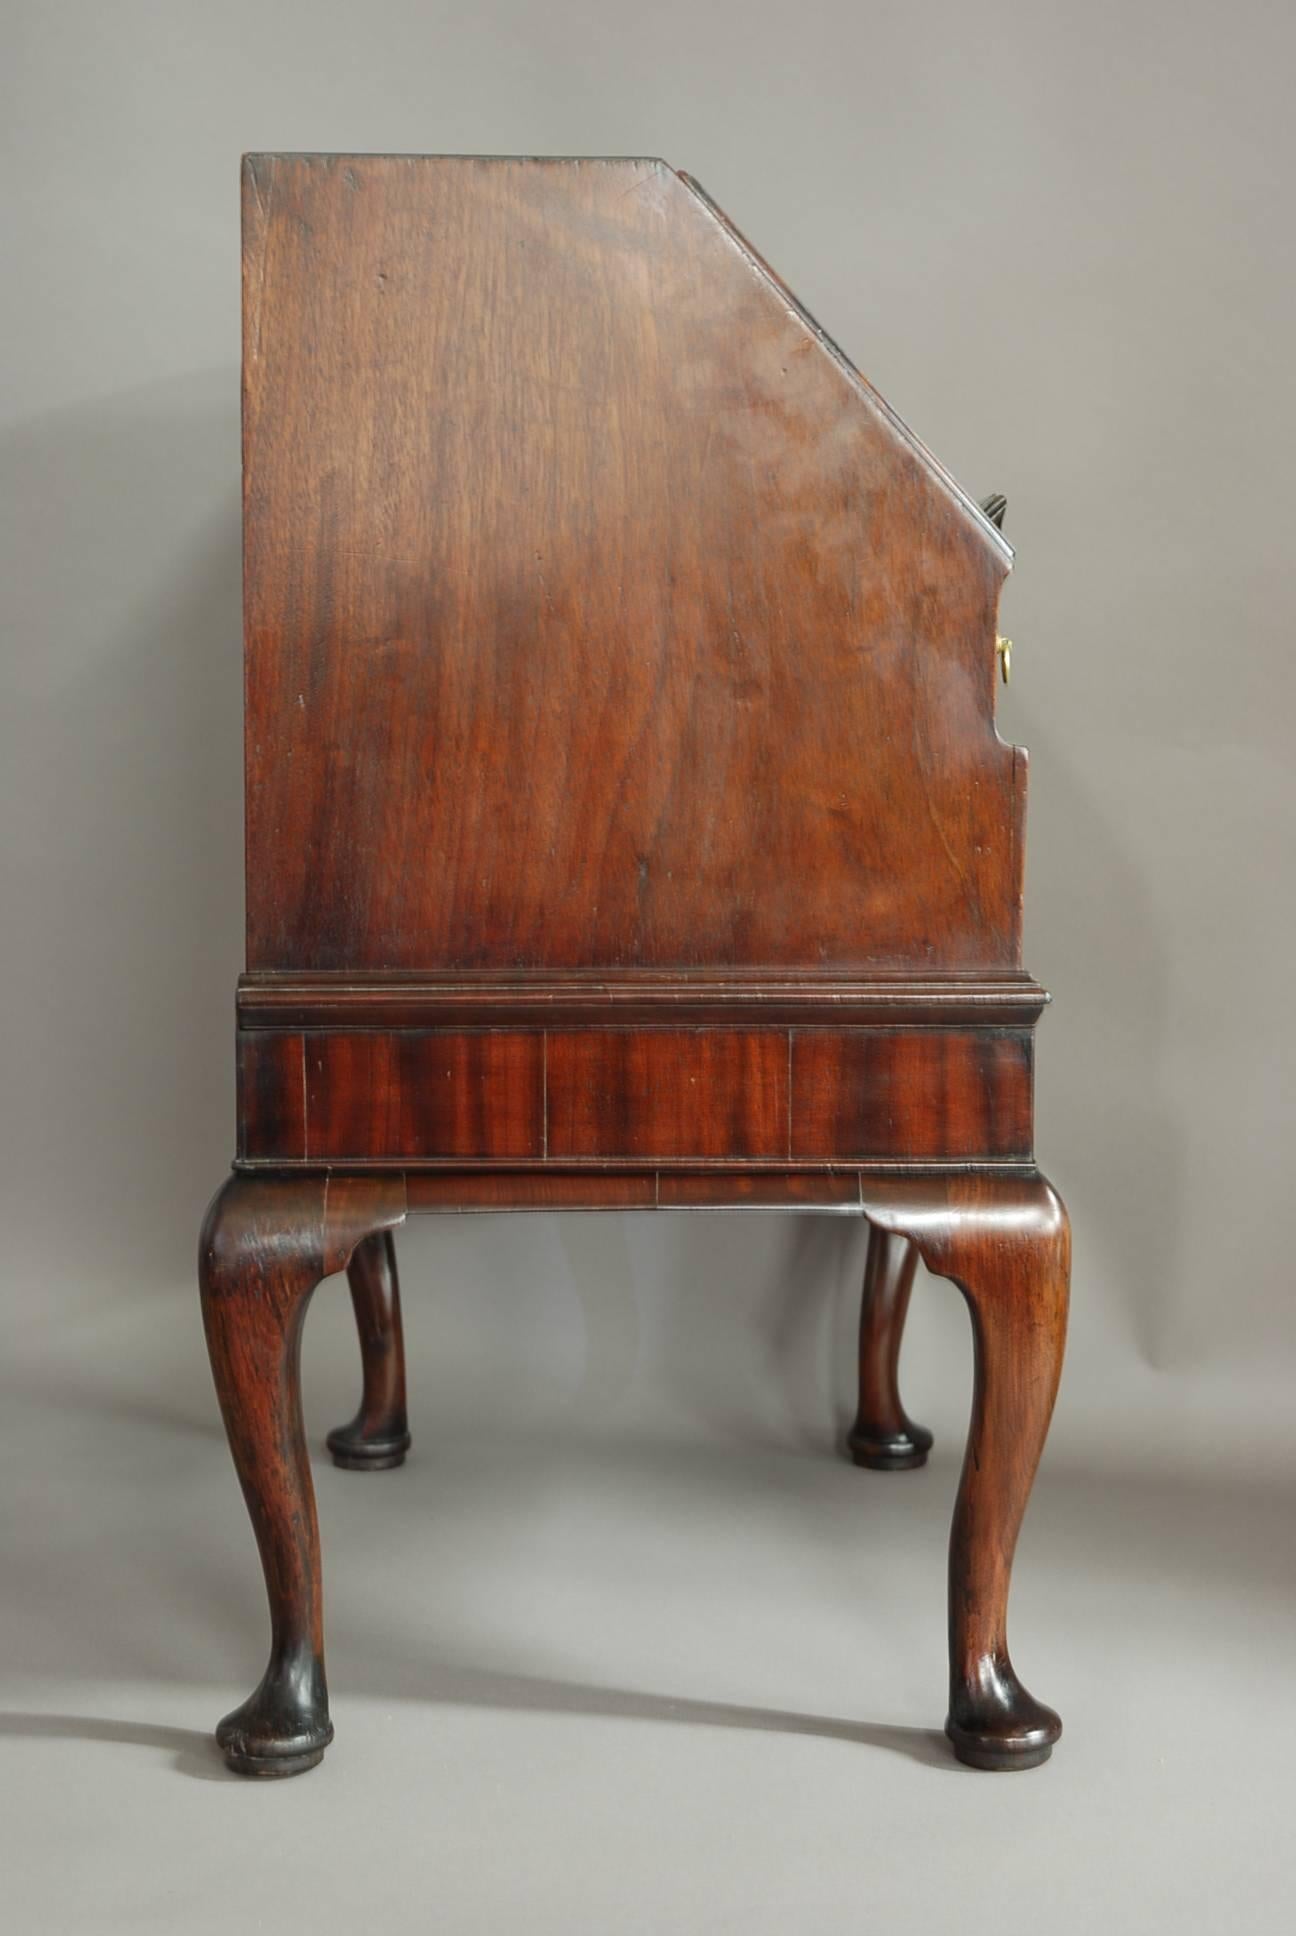 Rare Mid-18th Century Mahogany Bureau on Stand of Small Proportions For Sale 4